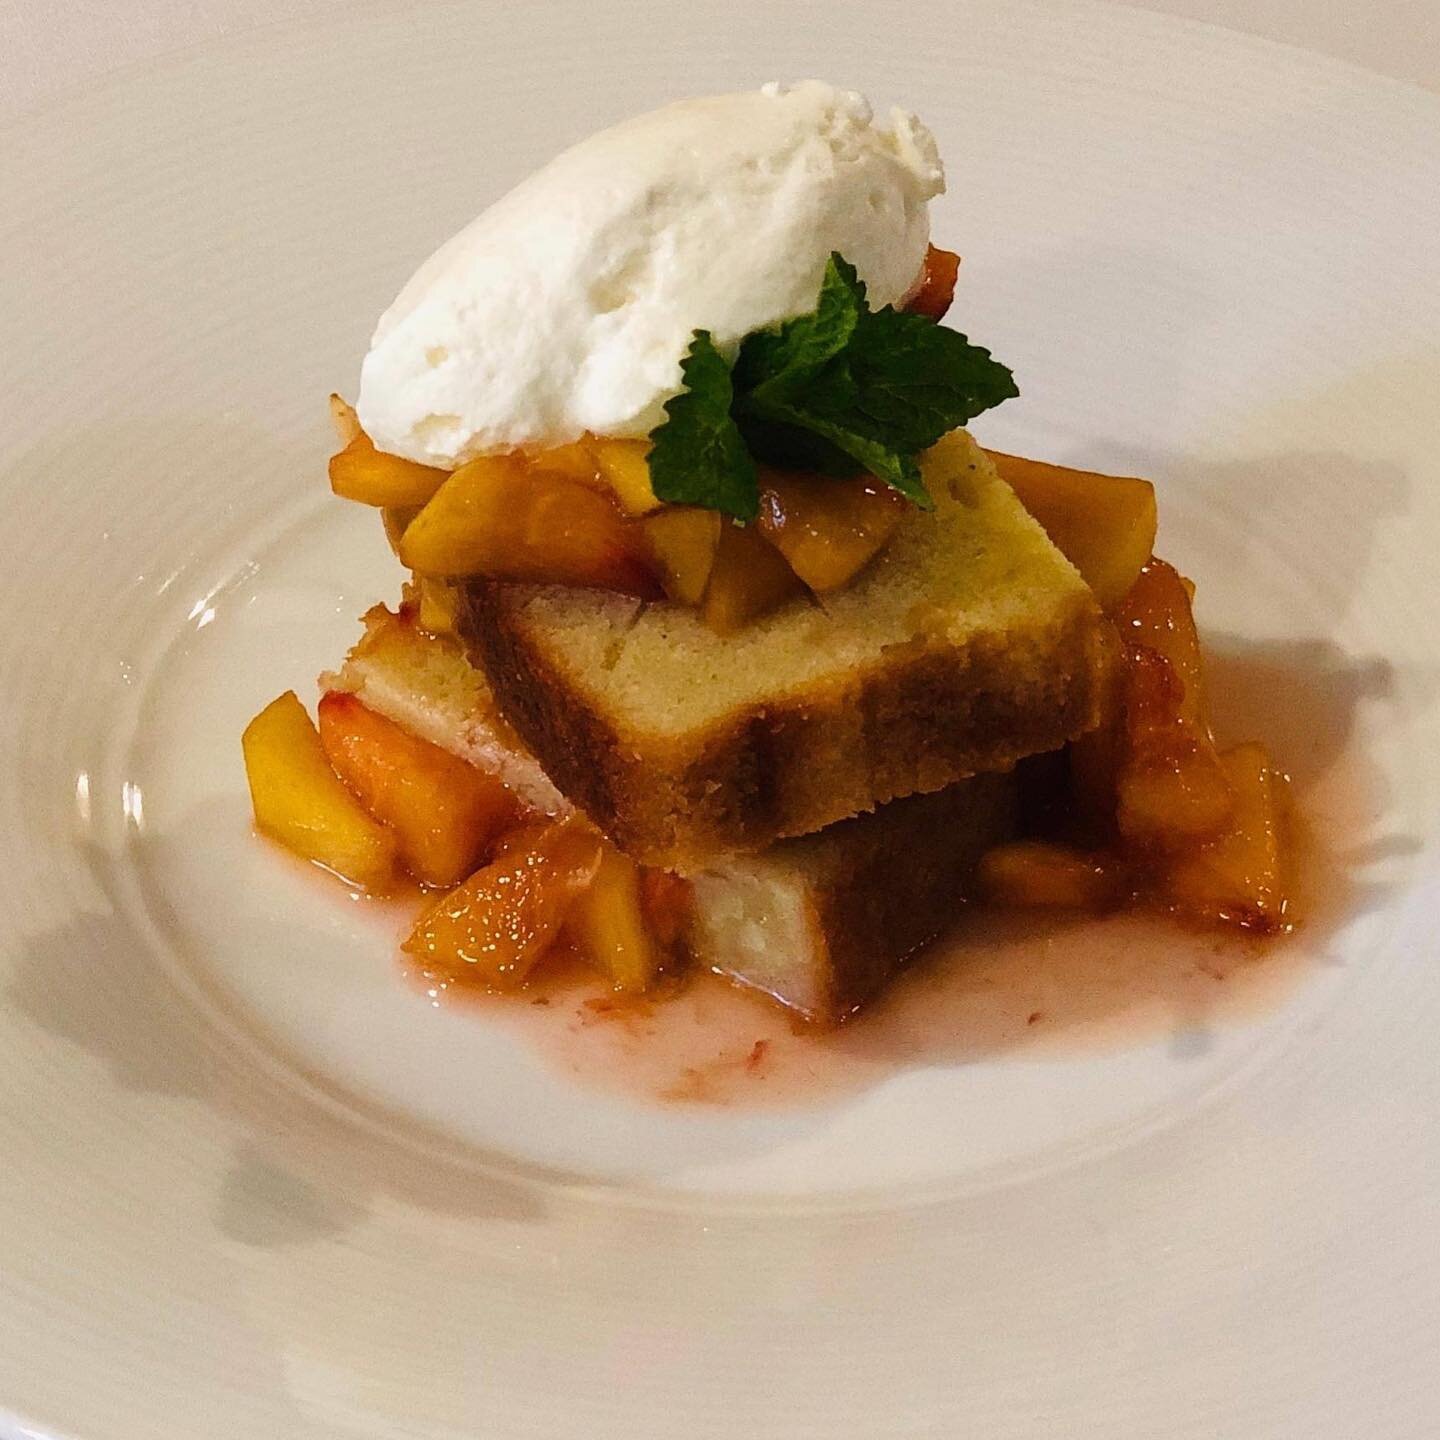 @il_palio has teamed up with @ncartmuseum to celebrate Bacchus, the god of agriculture and wine! Come in through September 15th and try out the Almond Torta made with NC peach compote!

#ilpalionc #thesienahotel #visitchapelhill #italiancooking #ncma